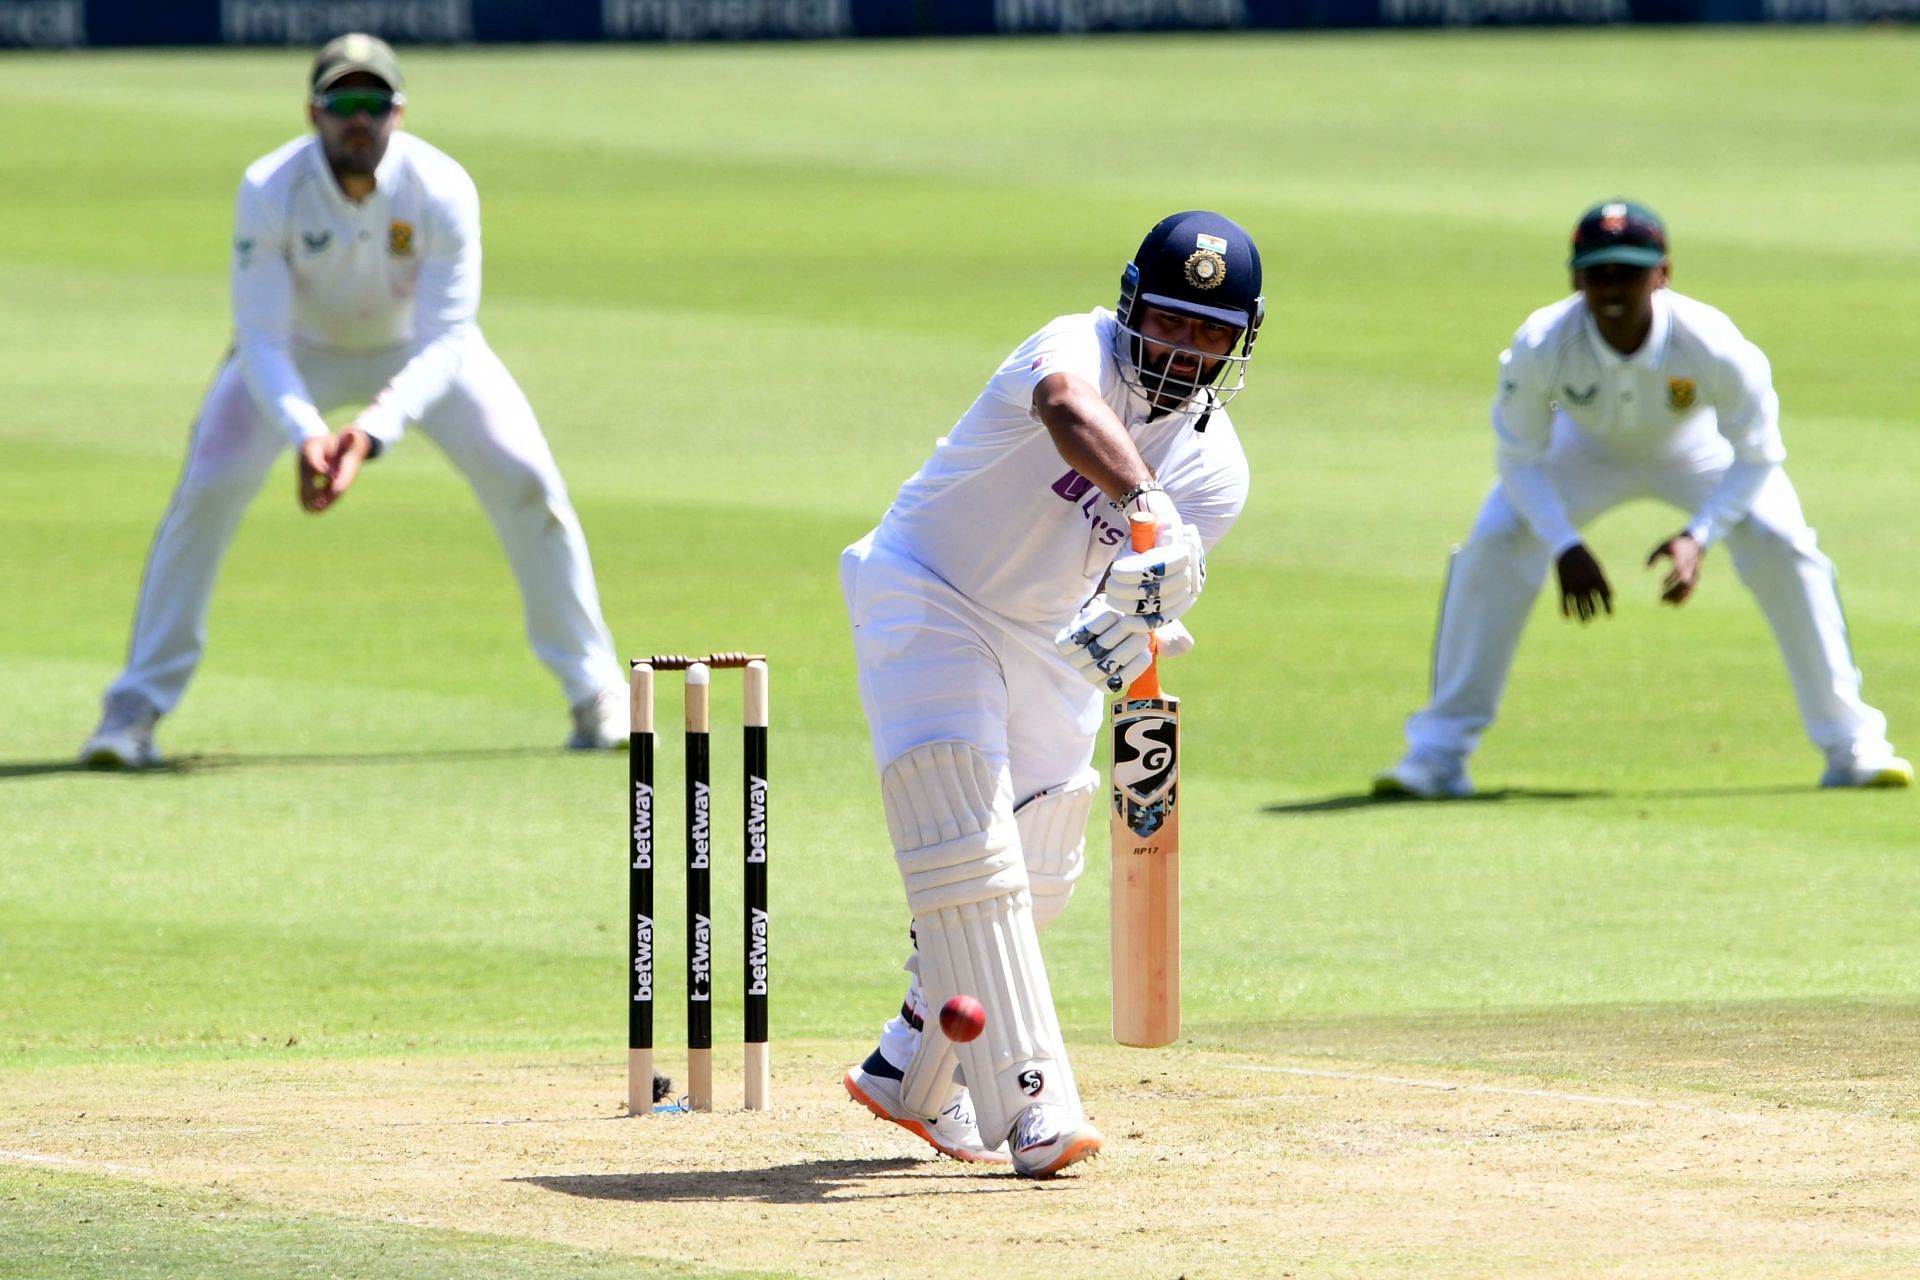 Aakash Chopra expects Team India to set a decent fourth-innings target for South Africa